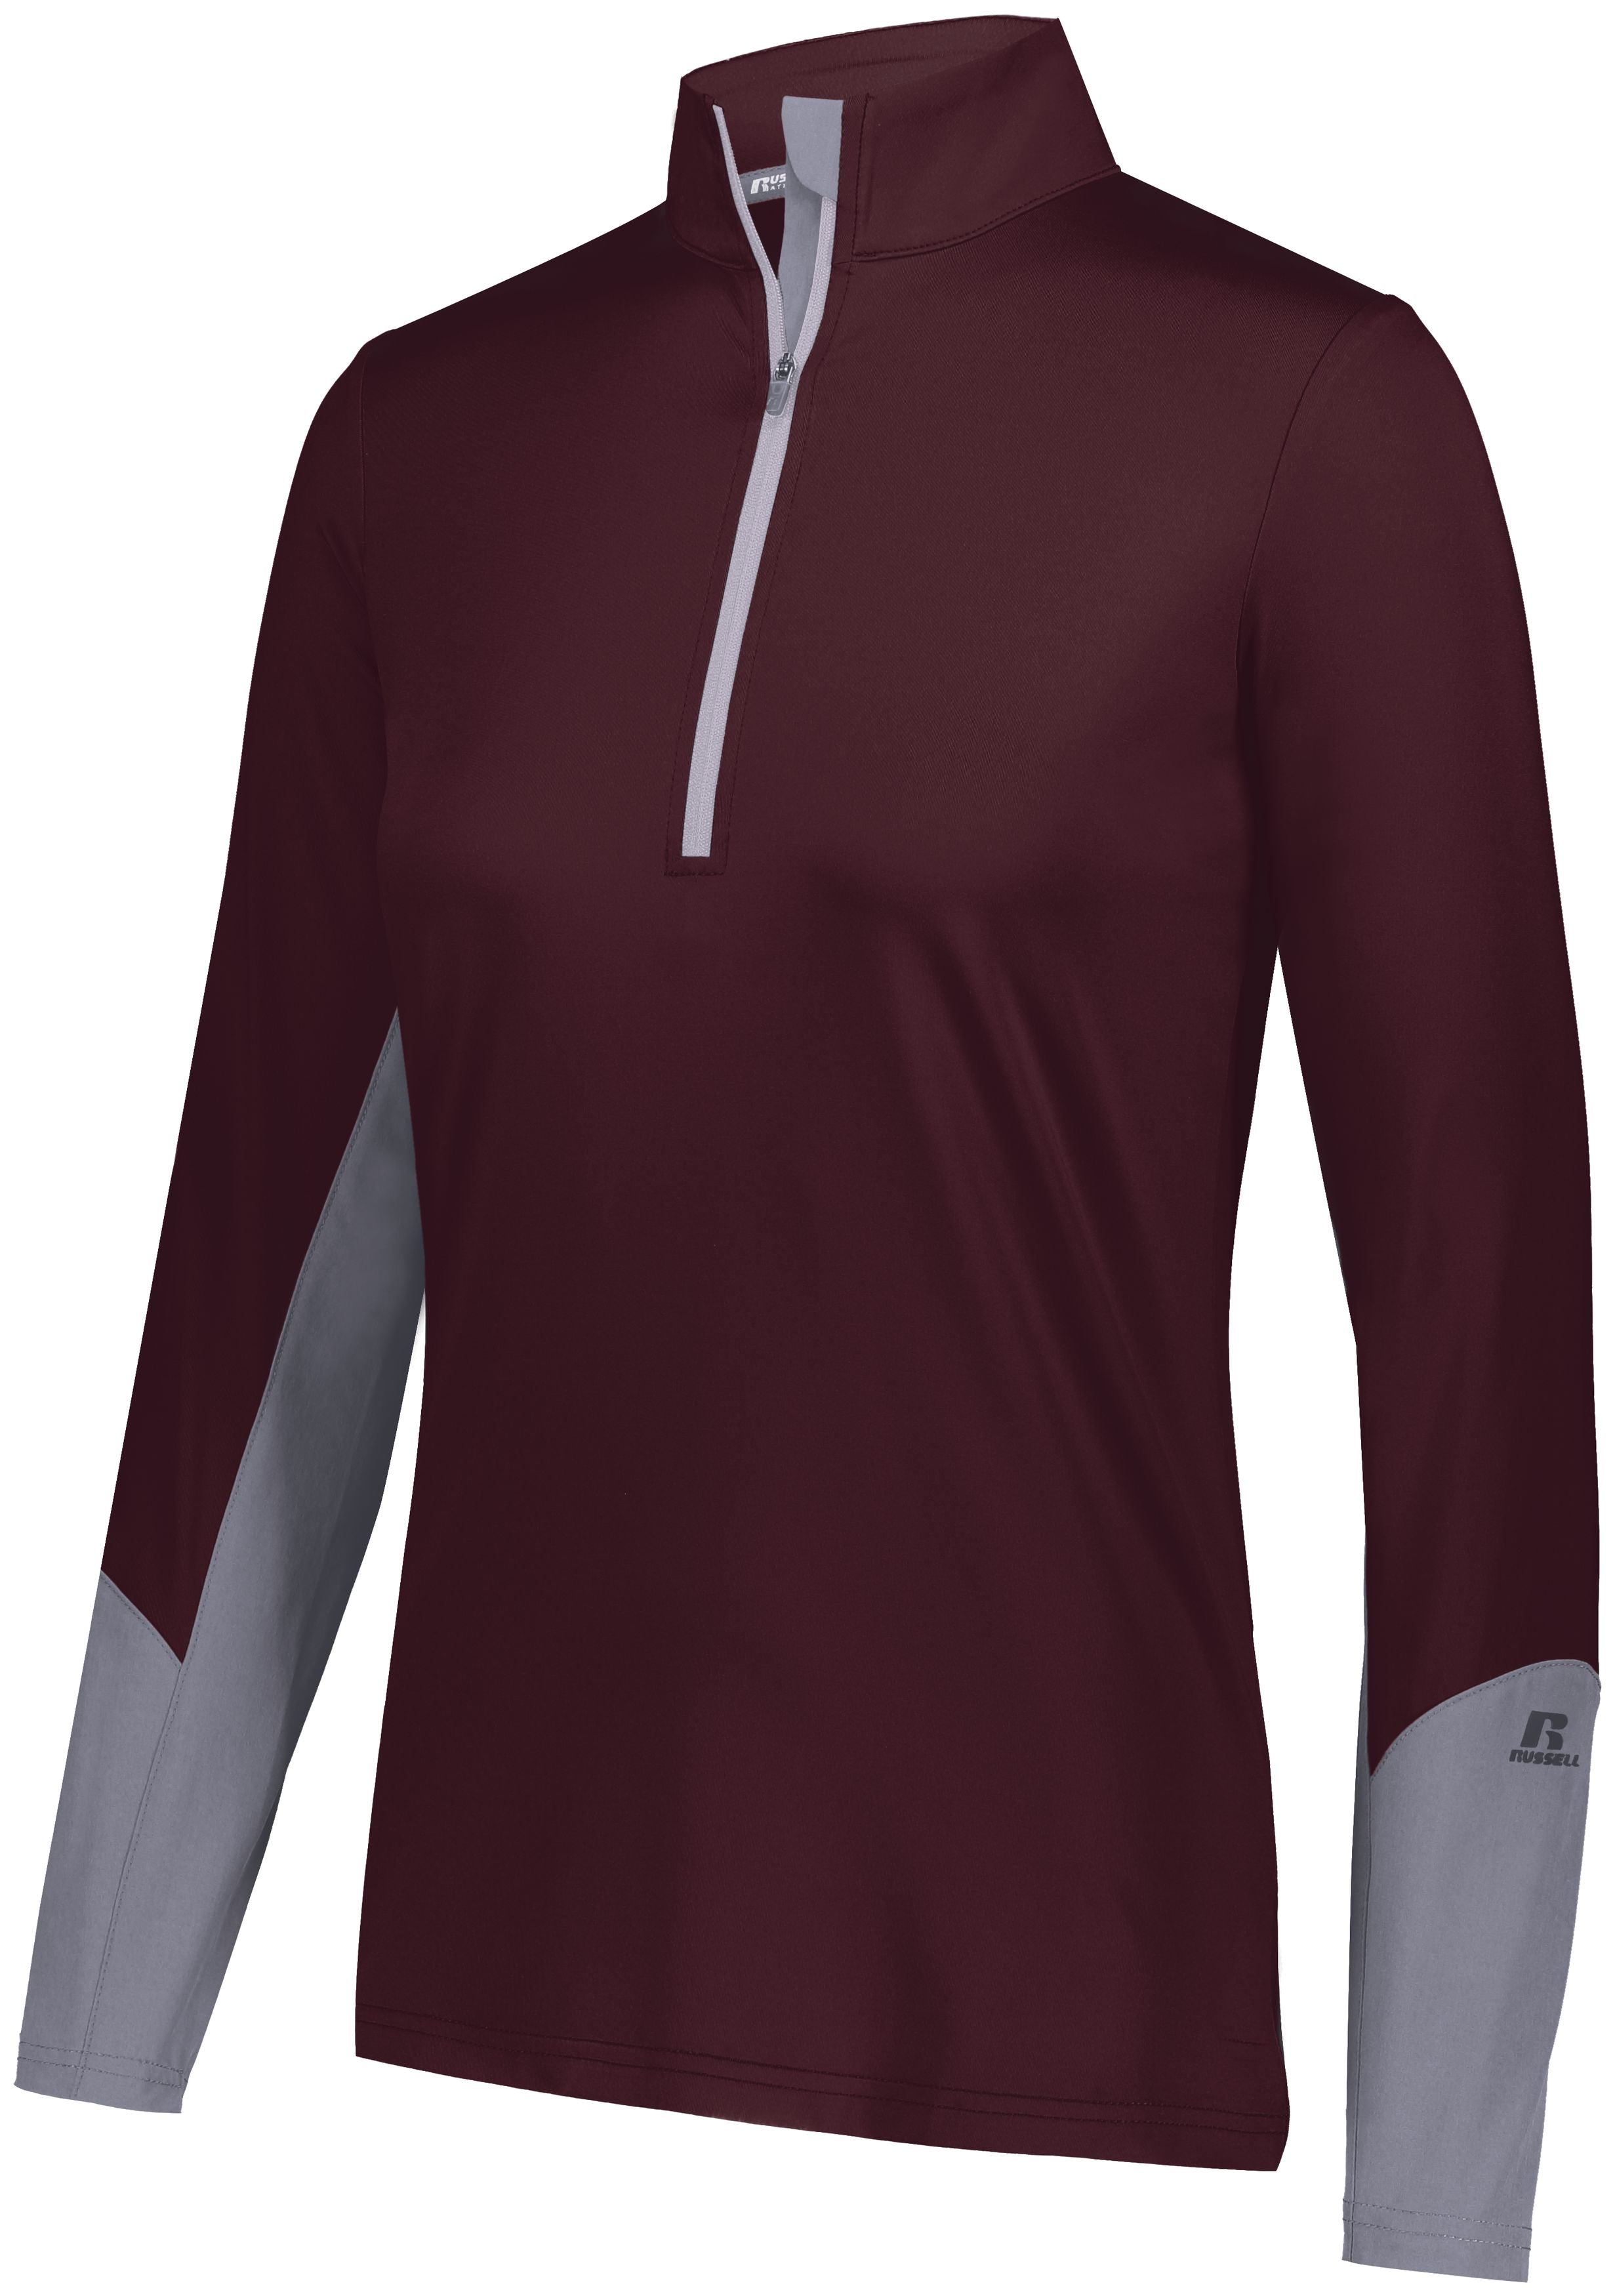 Russell Athletic Ladies Hybrid Pullover in Maroon/Steel  -Part of the Ladies, Russell-Athletic-Products, Shirts product lines at KanaleyCreations.com